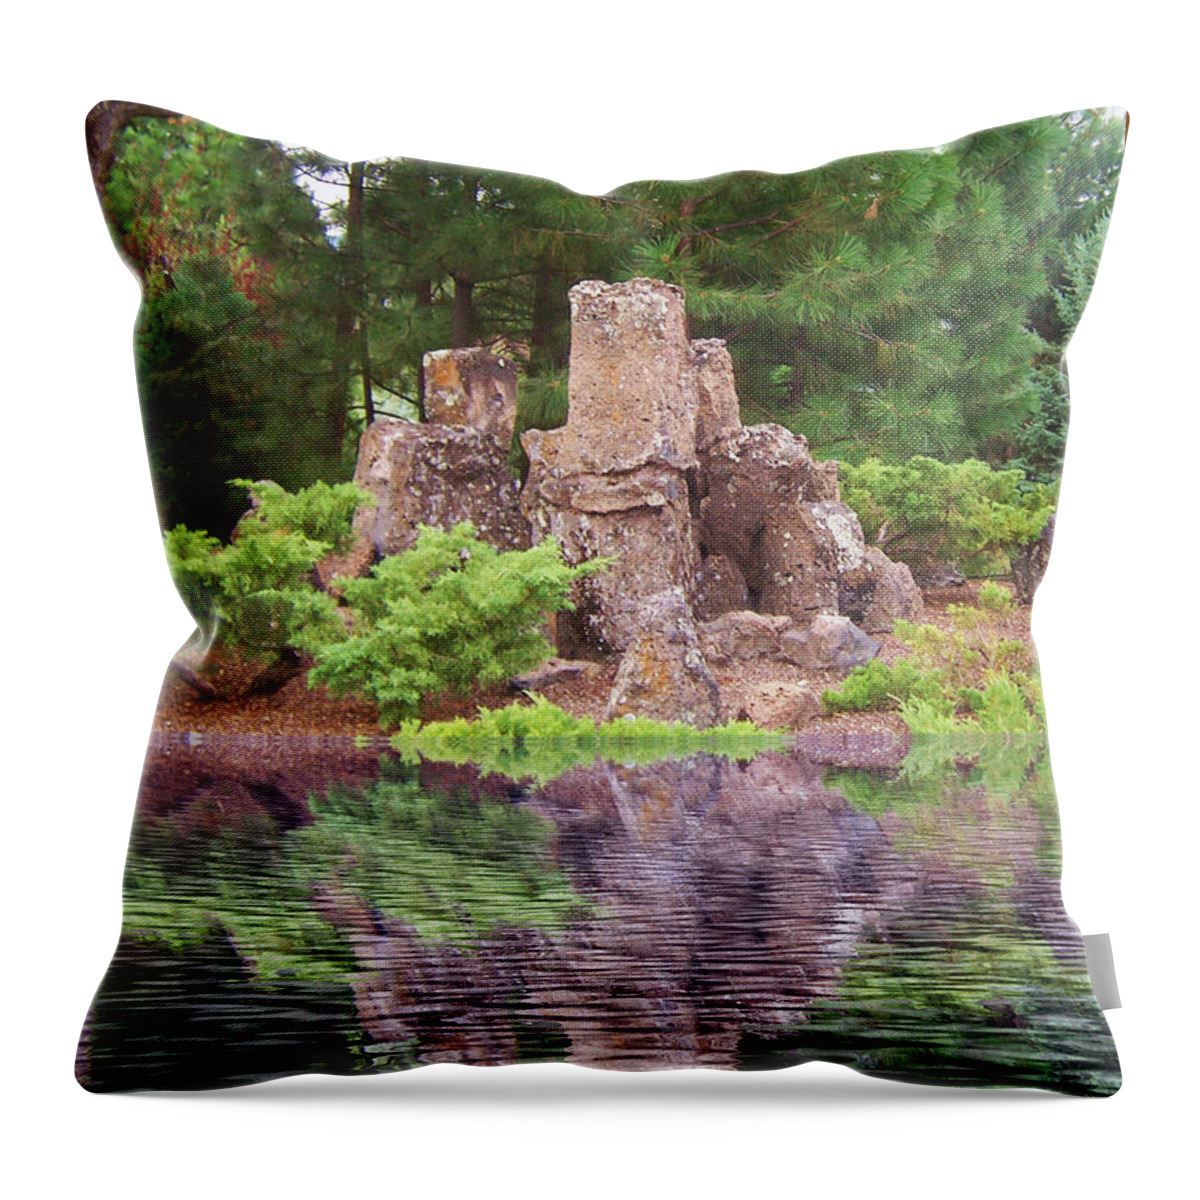 Yreka California Throw Pillow featuring the photograph Reflection by Colleen Cornelius